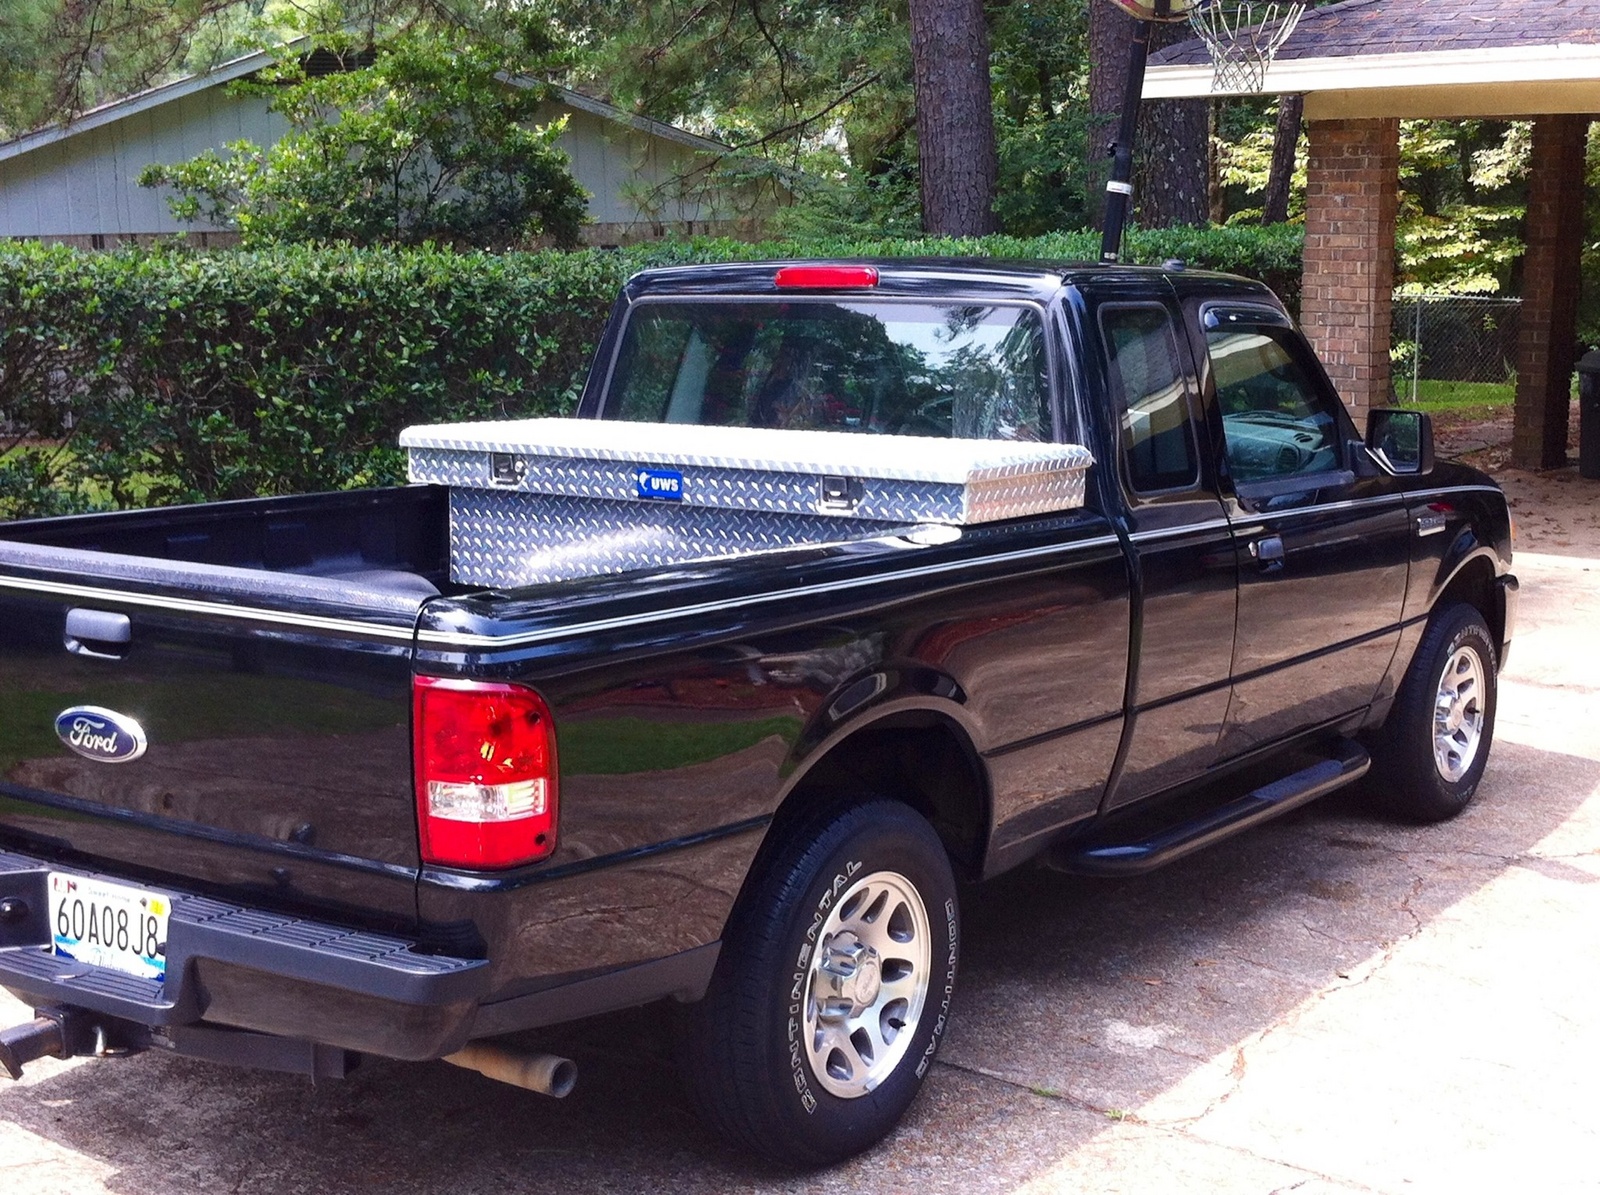 2010 Ford ranger max payload #4